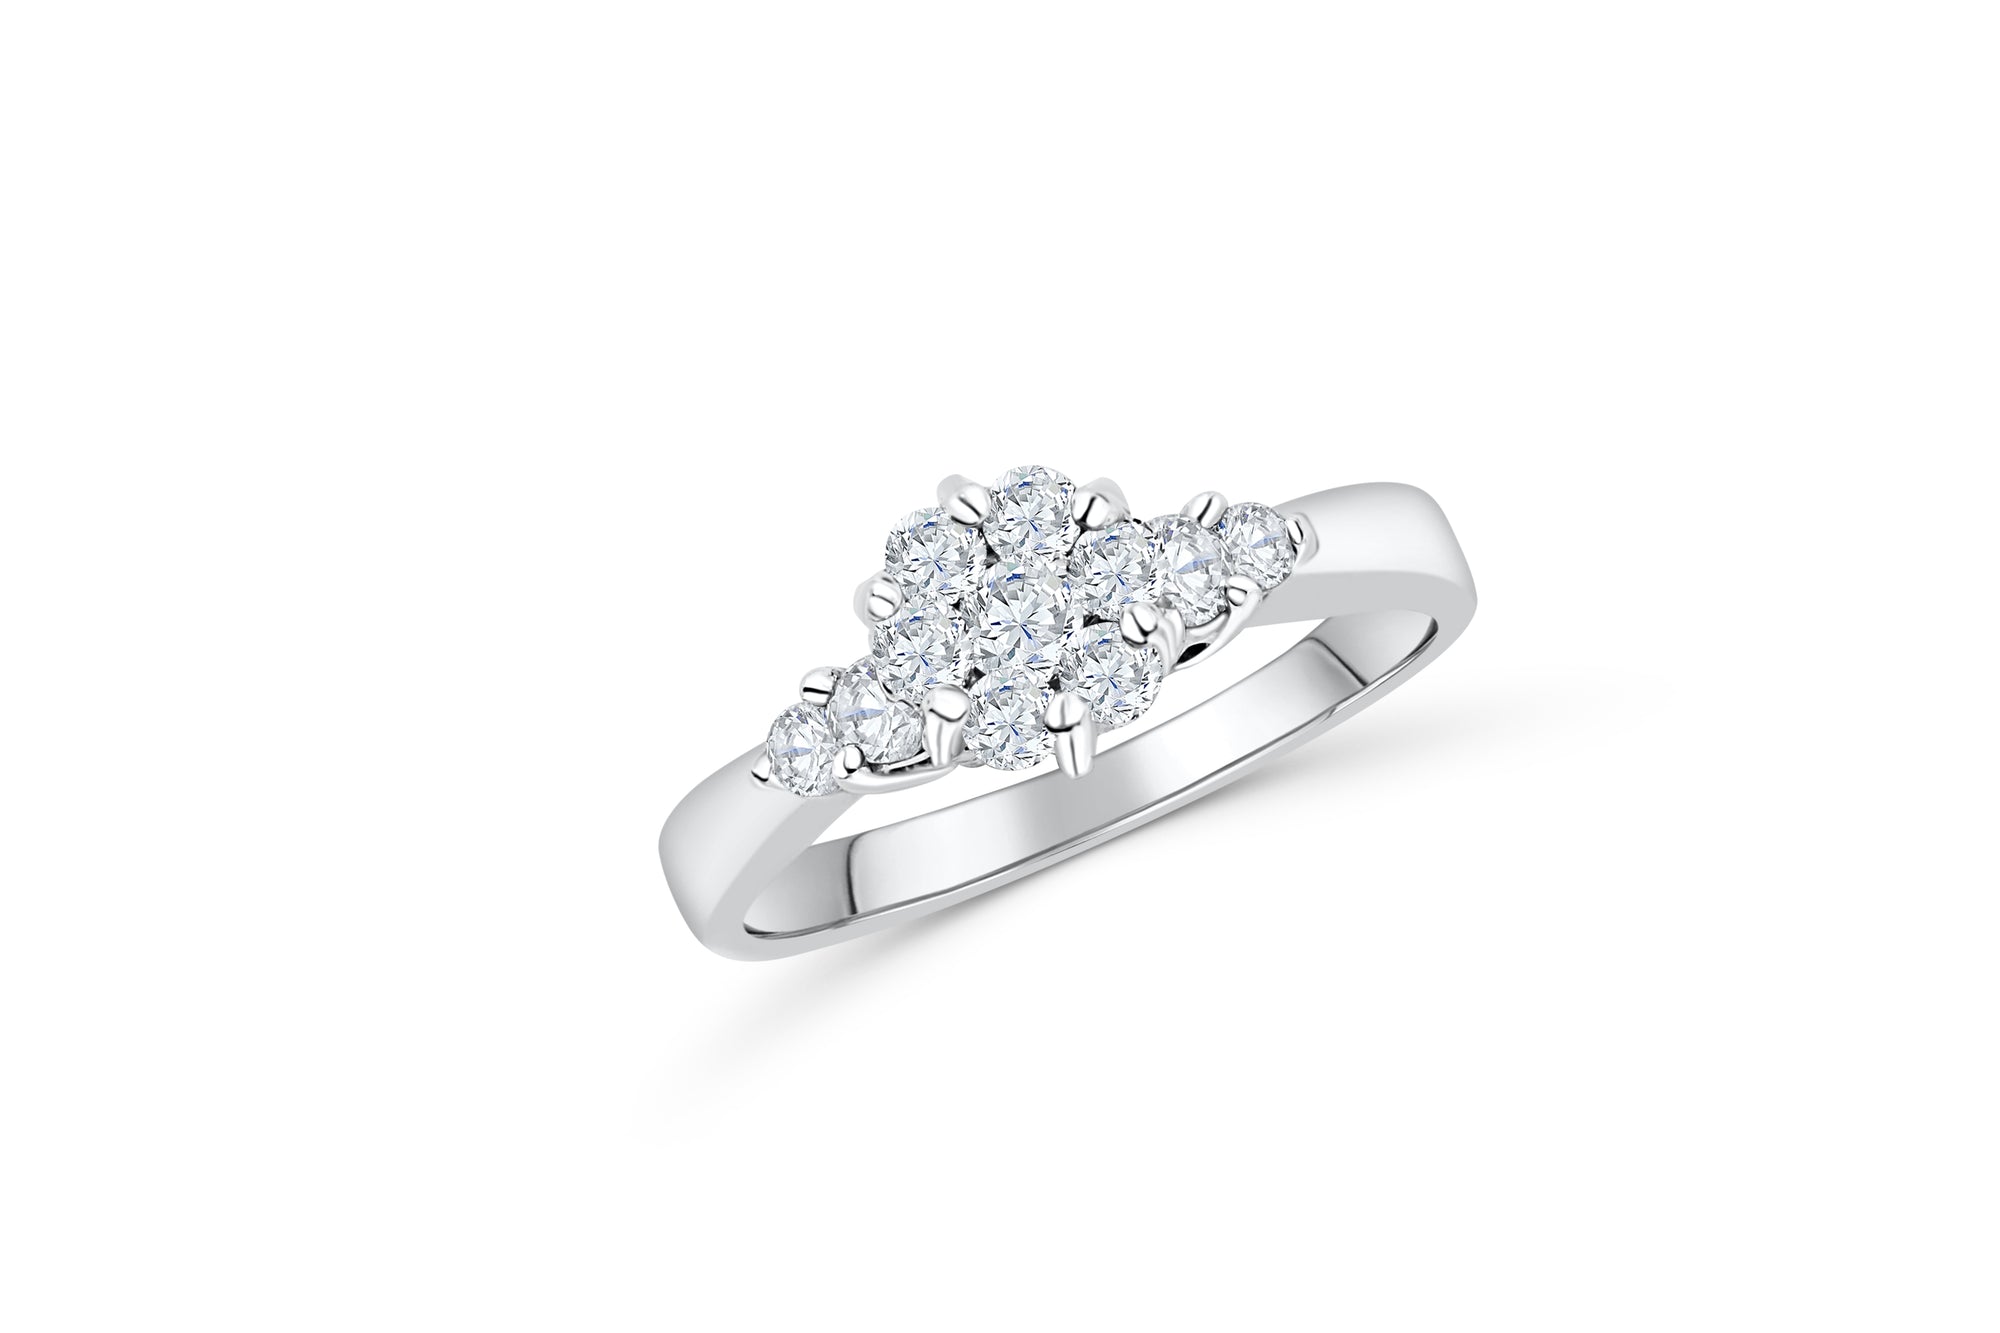 Cluster Diamond Engagement Ring 0.66 CT TW 14K White Gold DENG067 - NorthandSouthJewelry